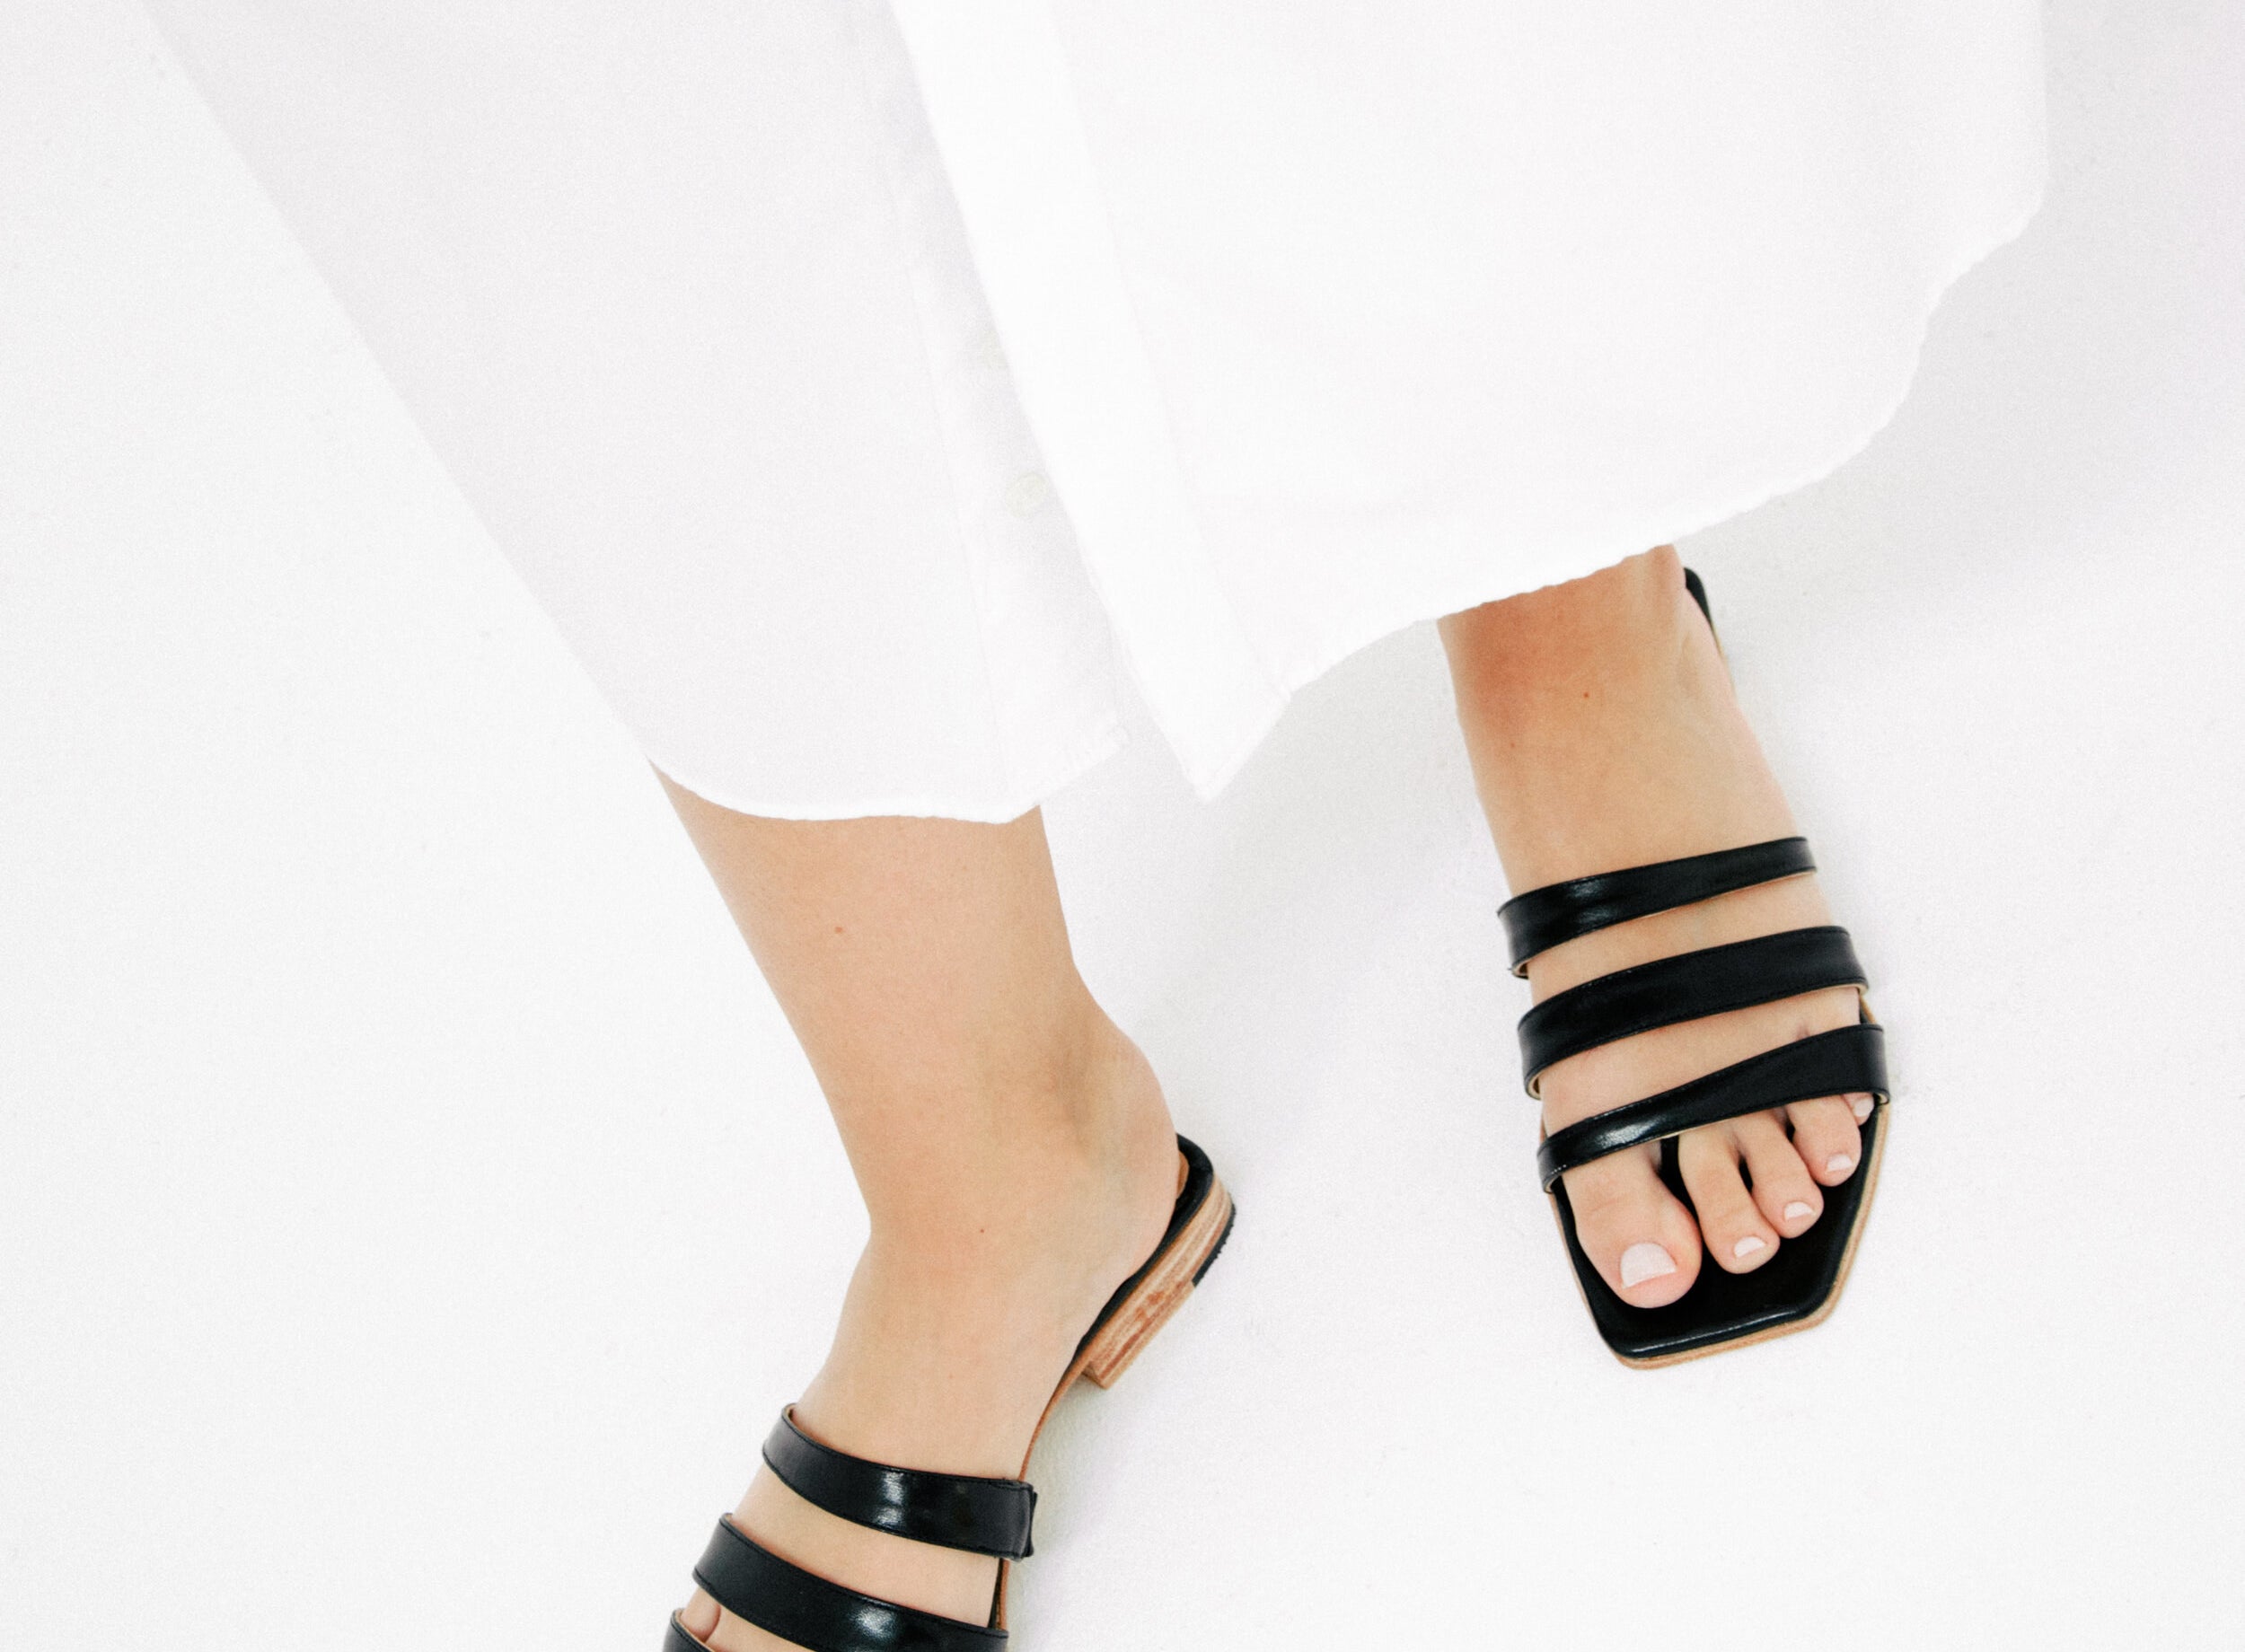 23 Practical Sandals That Are (Shockingly) Not Hideous